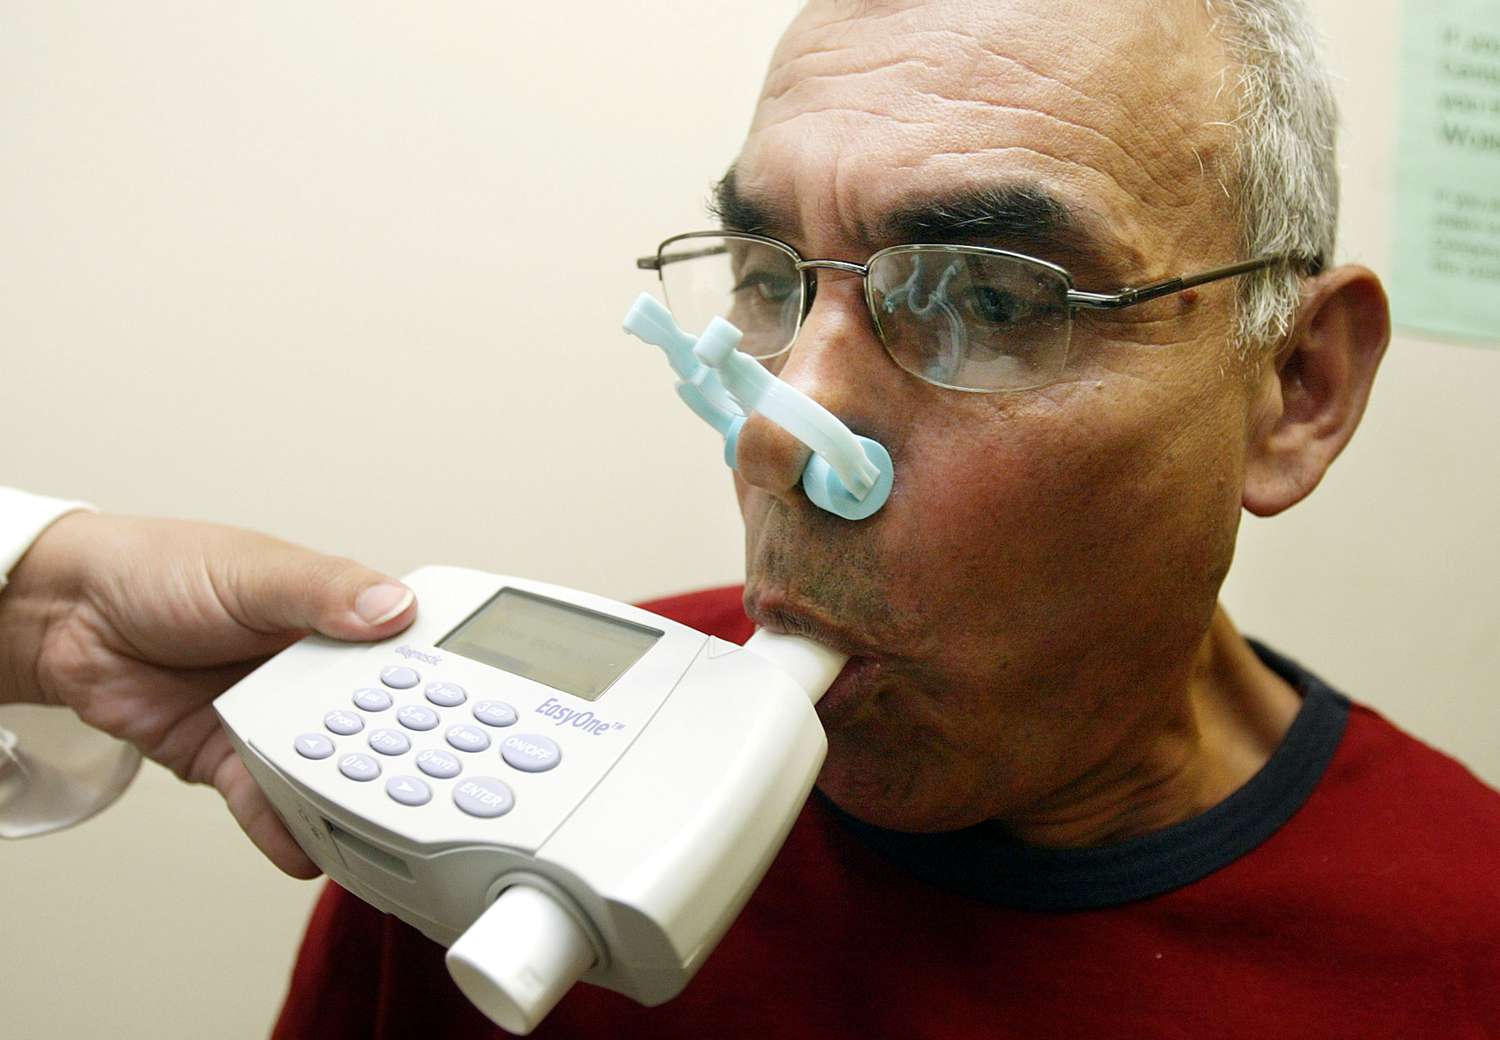 Spirometer Market Is Estimated To Witness High Growth Owing To Rising Prevalence Of Respiratory Diseases And Technological Advancements